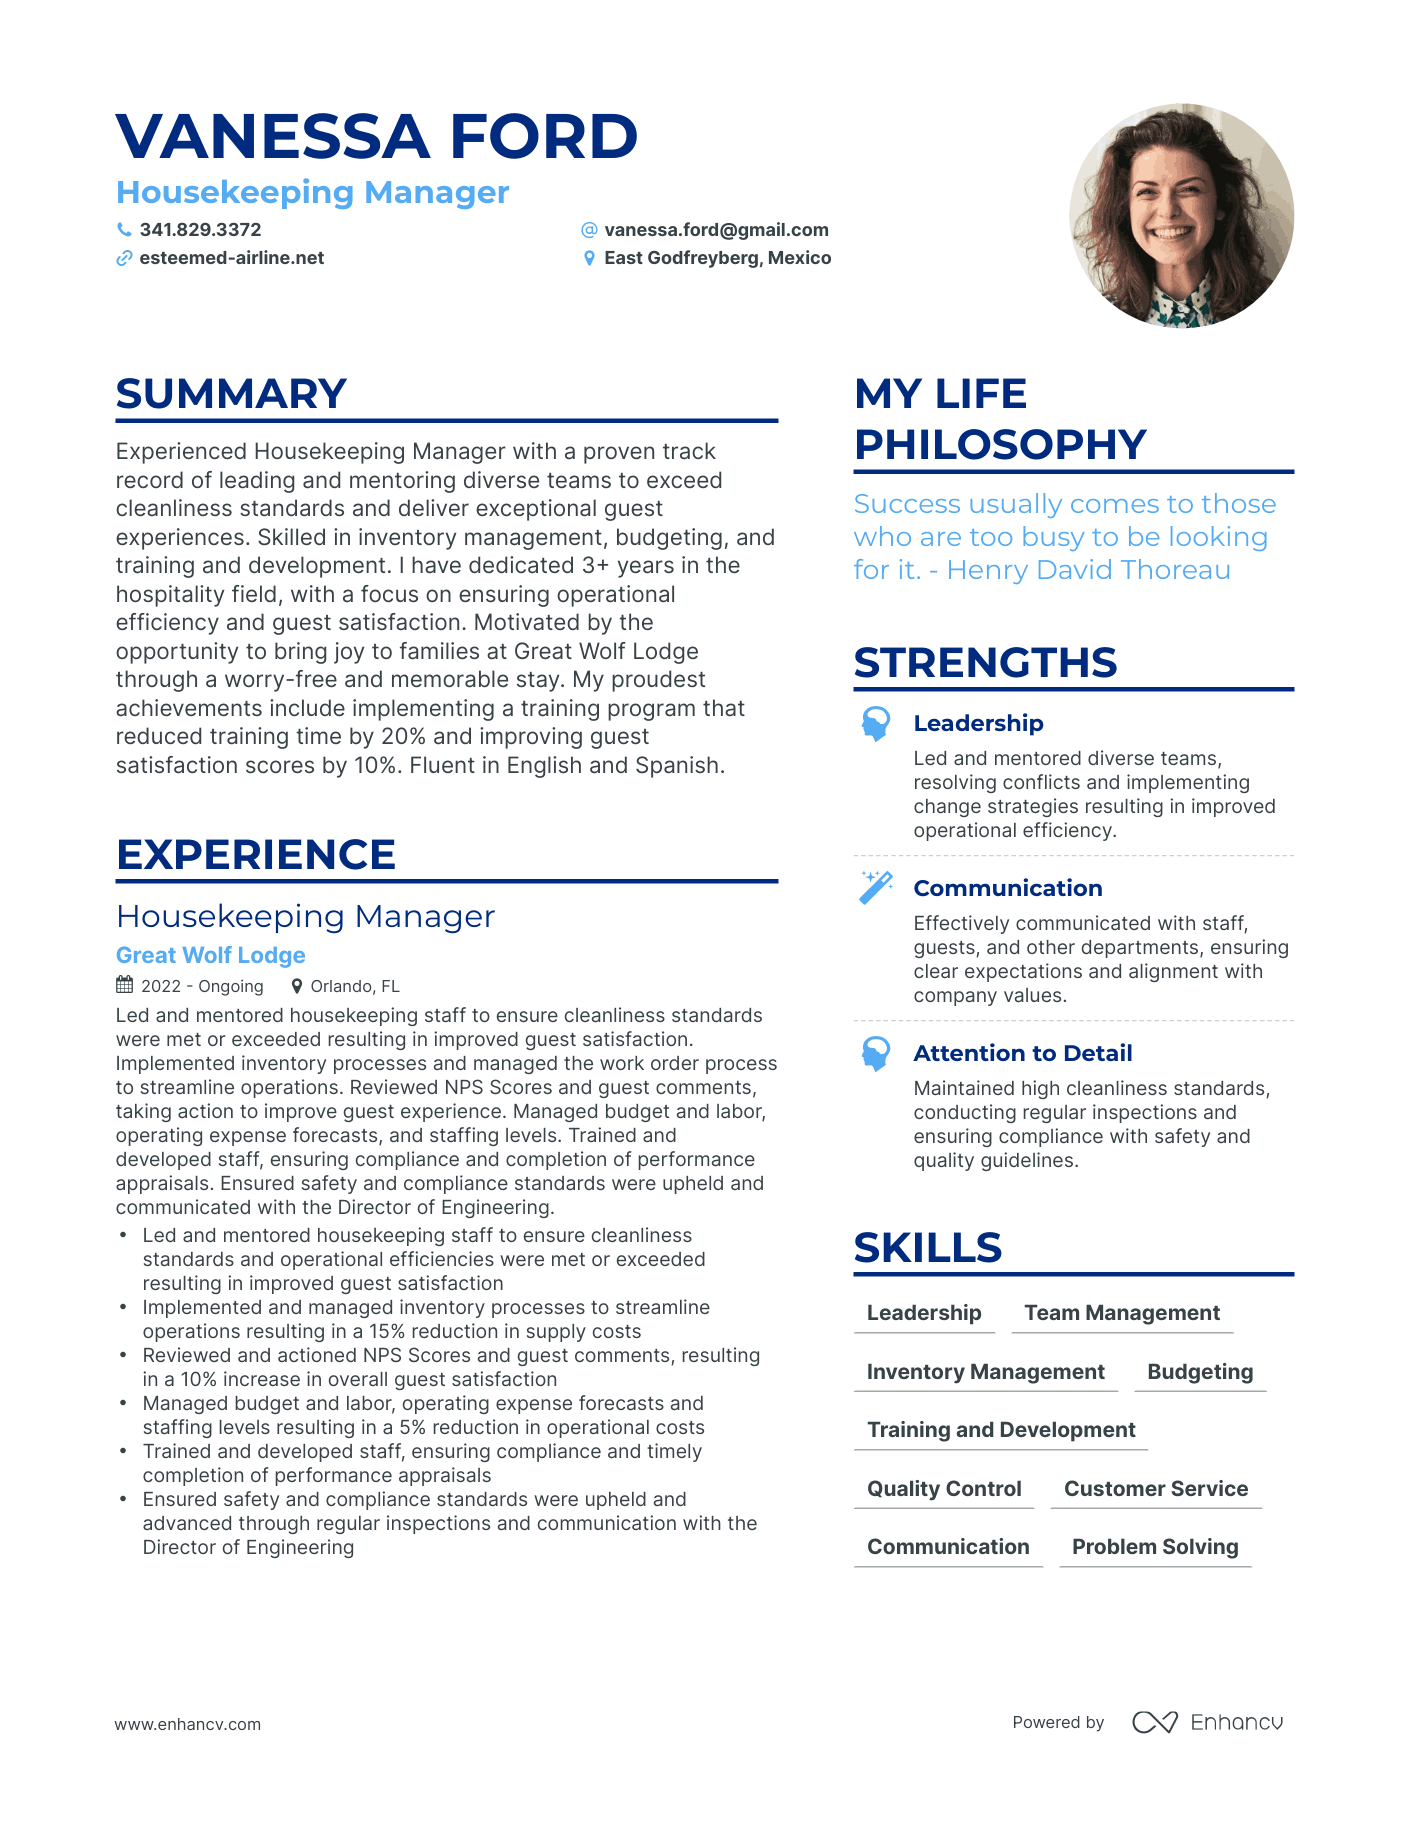 Housekeeping Manager resume example